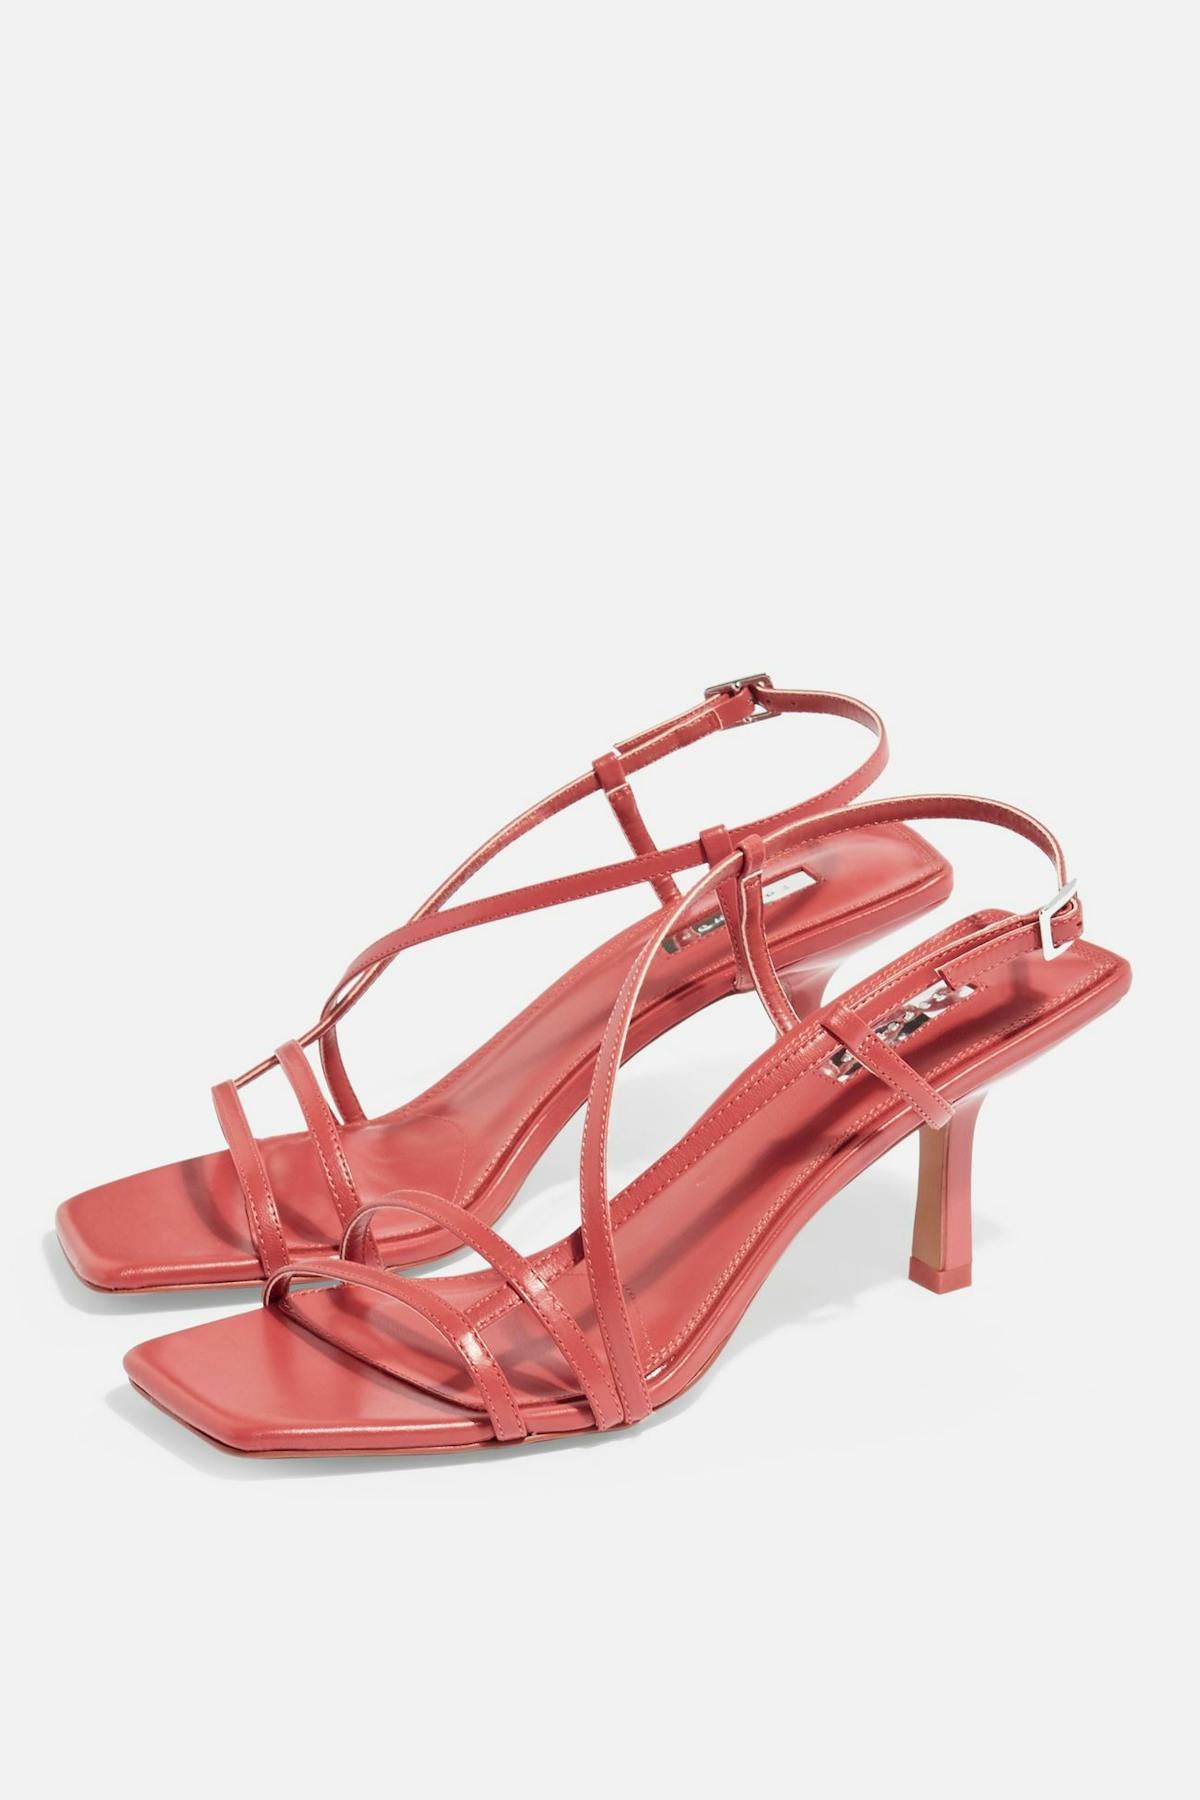 The sell-out Topshop sandals are now back in three new colours